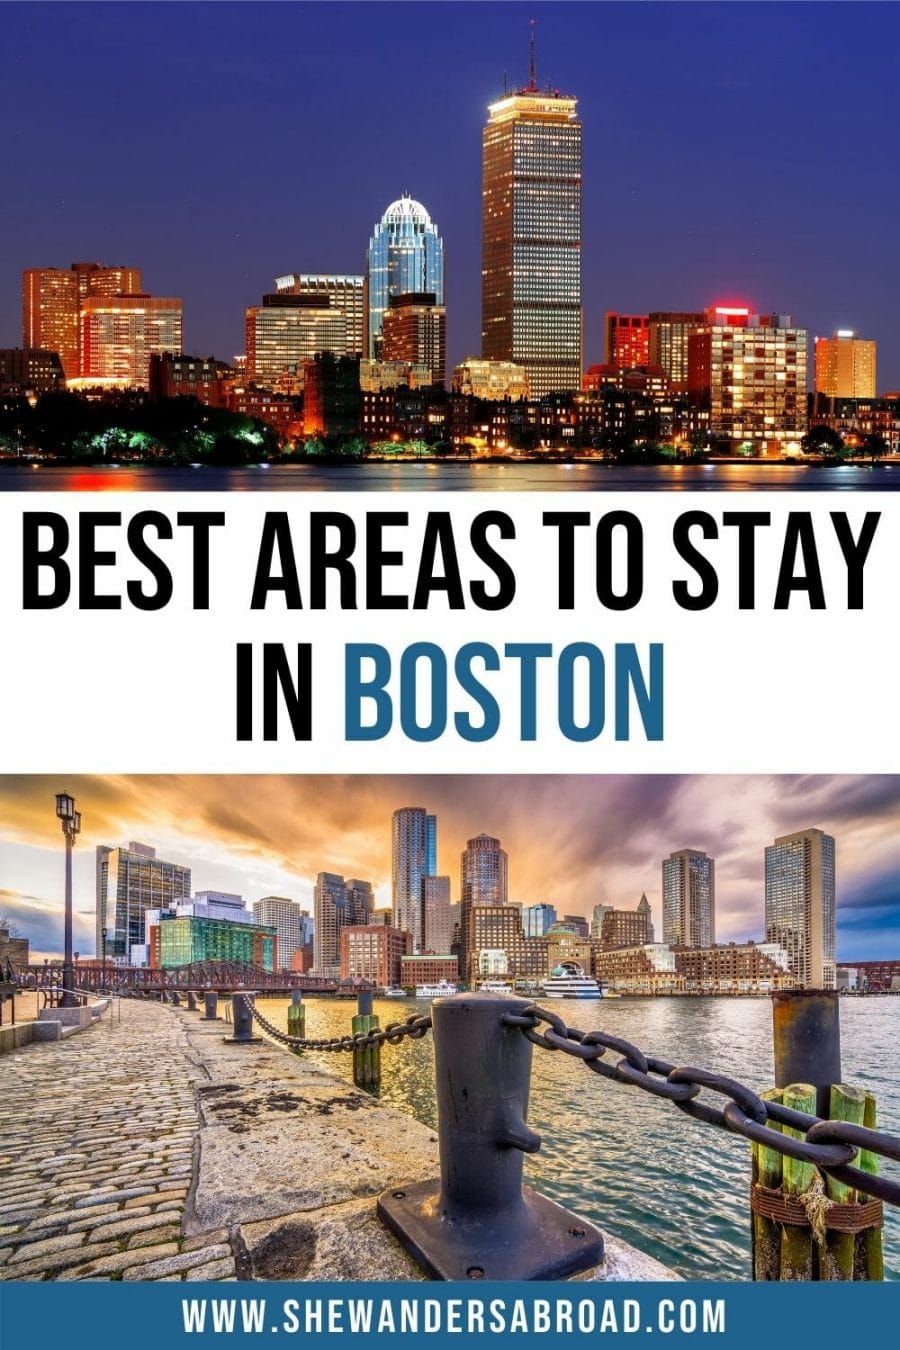 Where to Stay in Boston: 8 Best Areas & Hotels